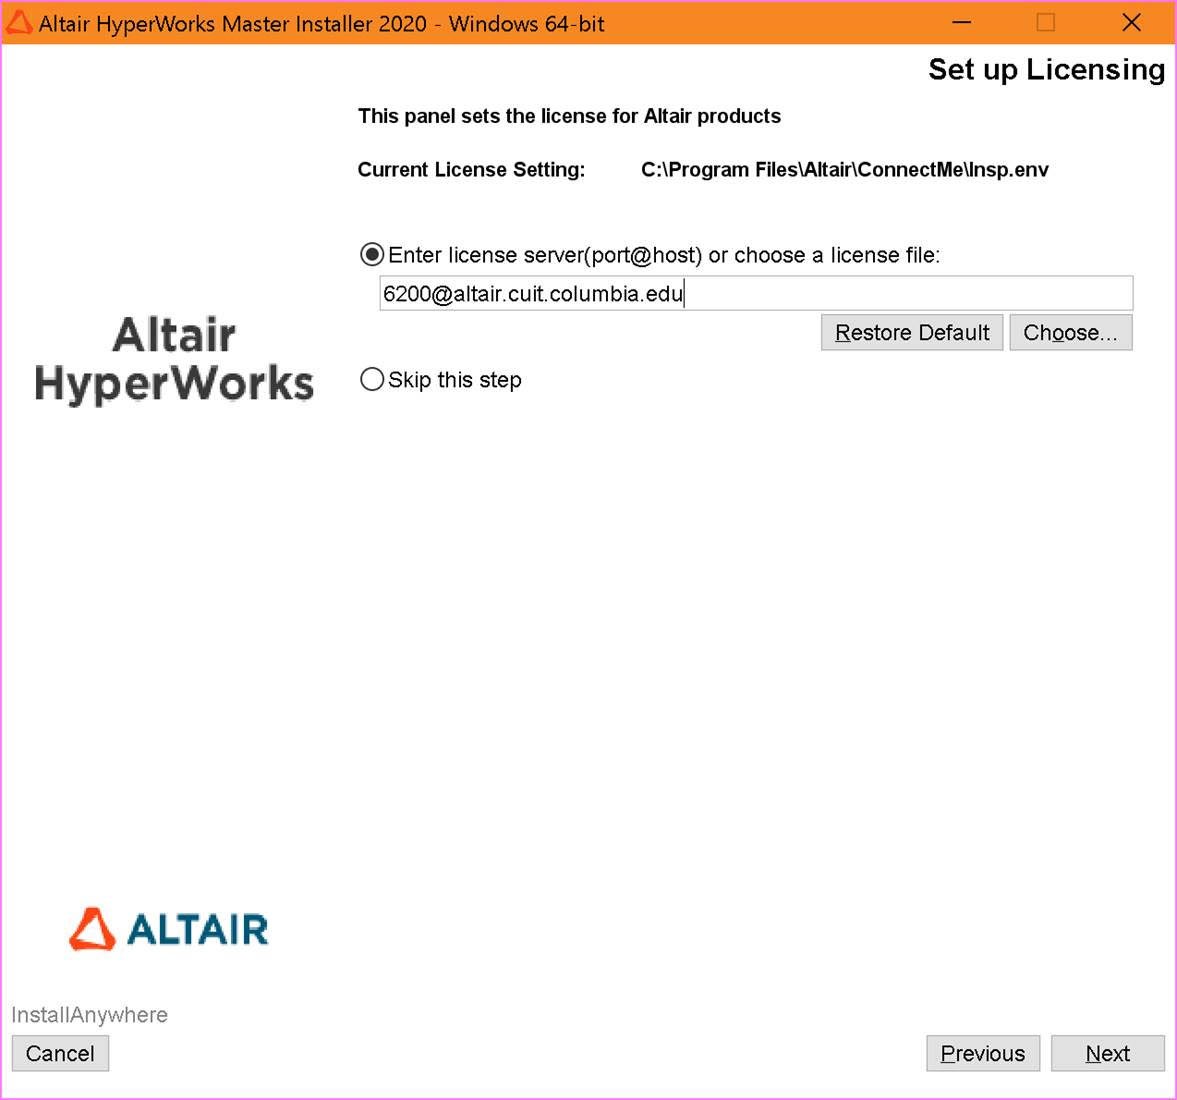 Altair's Set up licensing window: Select Enter license server option and enter 6200@altair.cuit.columbia.edu